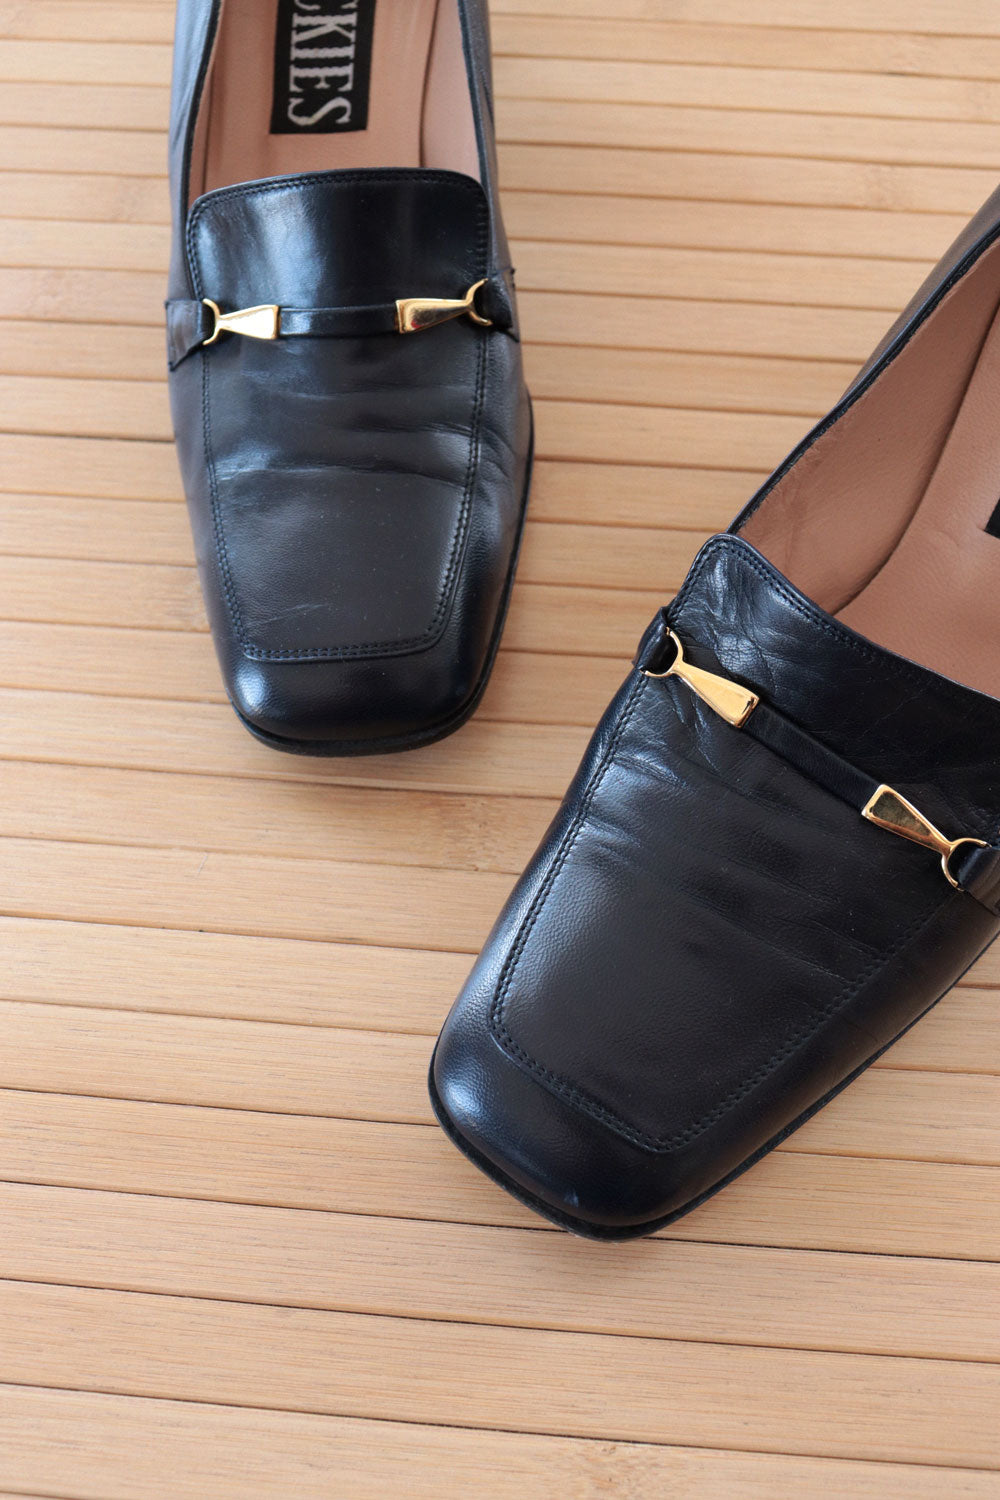 Navy Leather Heeled Loafers 8